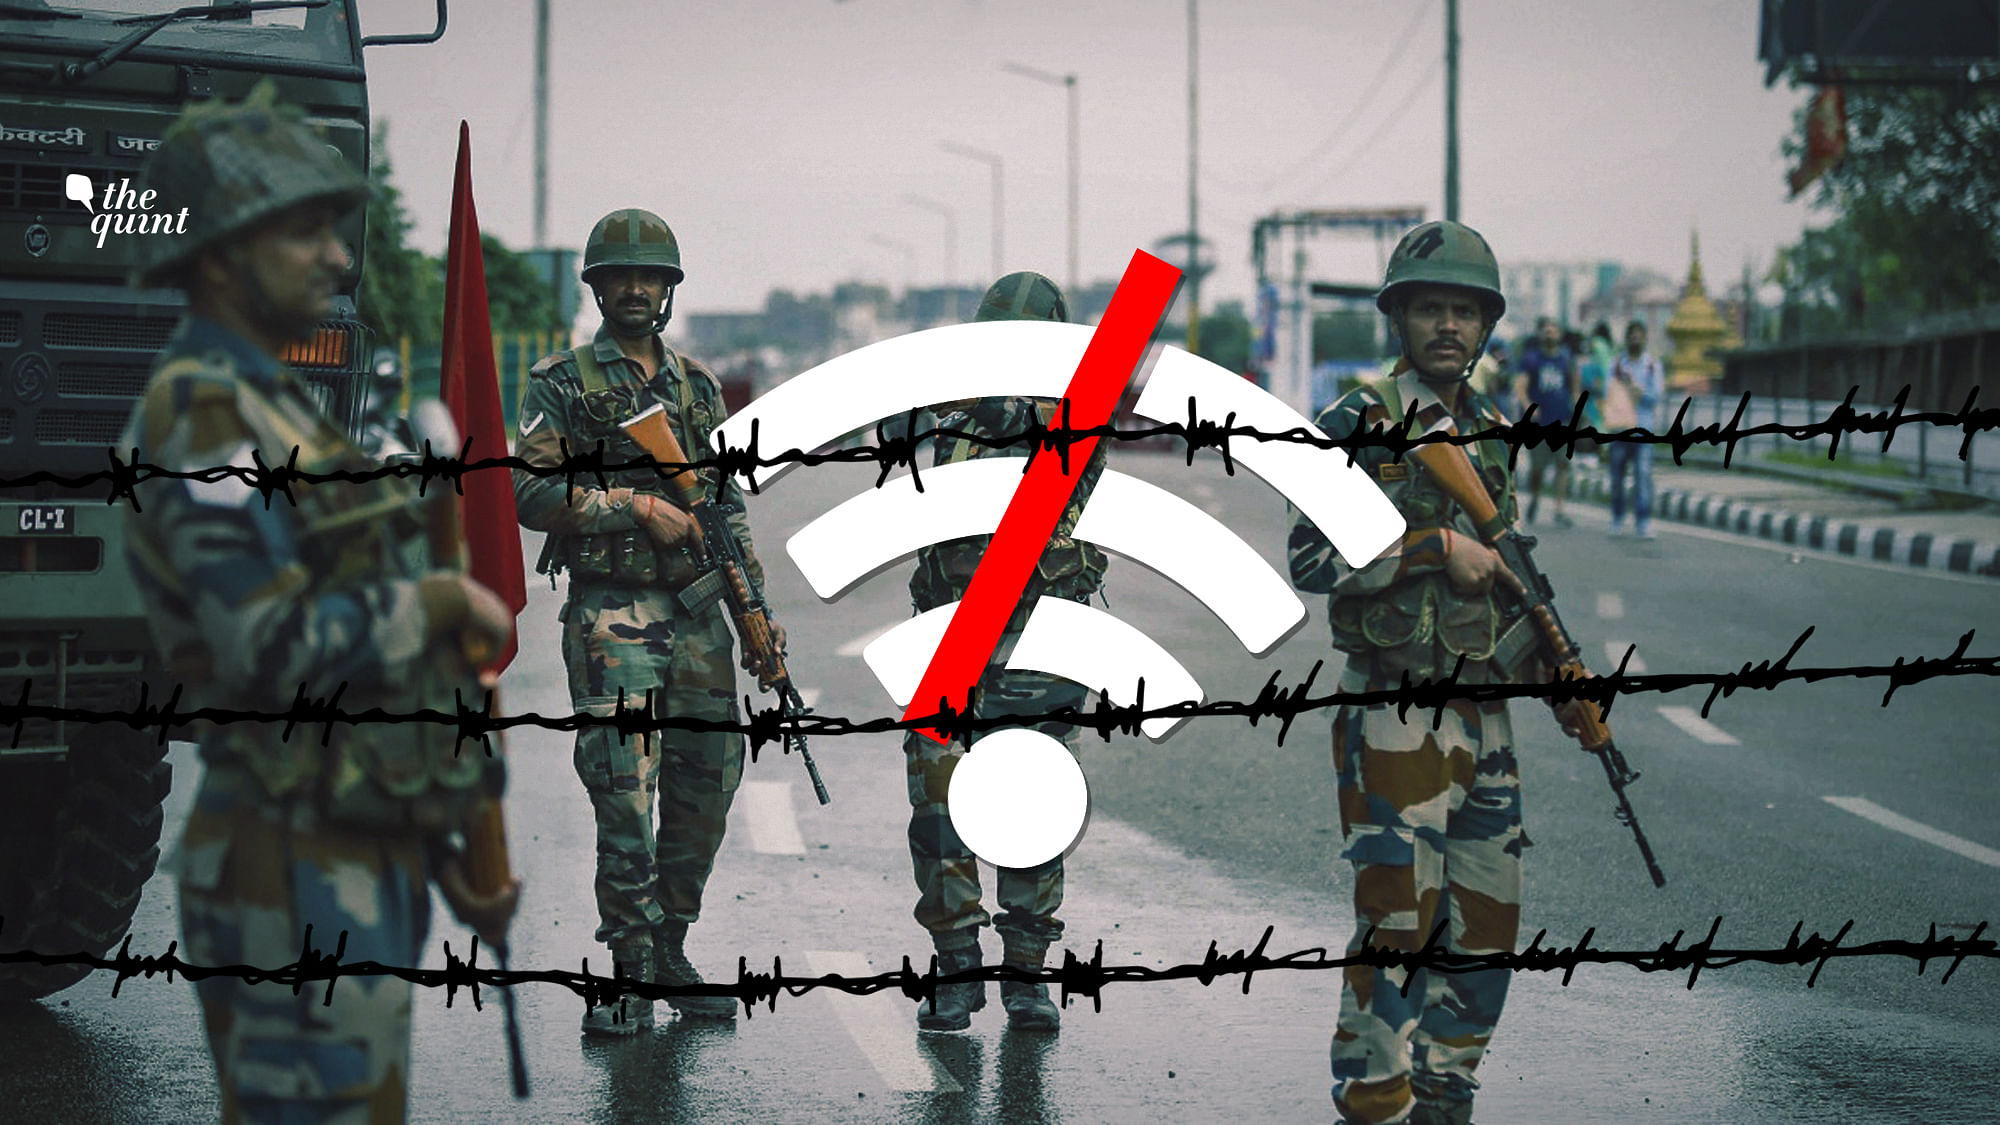 Jammu and Kashmir has been under an Internet shutdown while Article 370 of the Constitution was abrogated by the Central government.